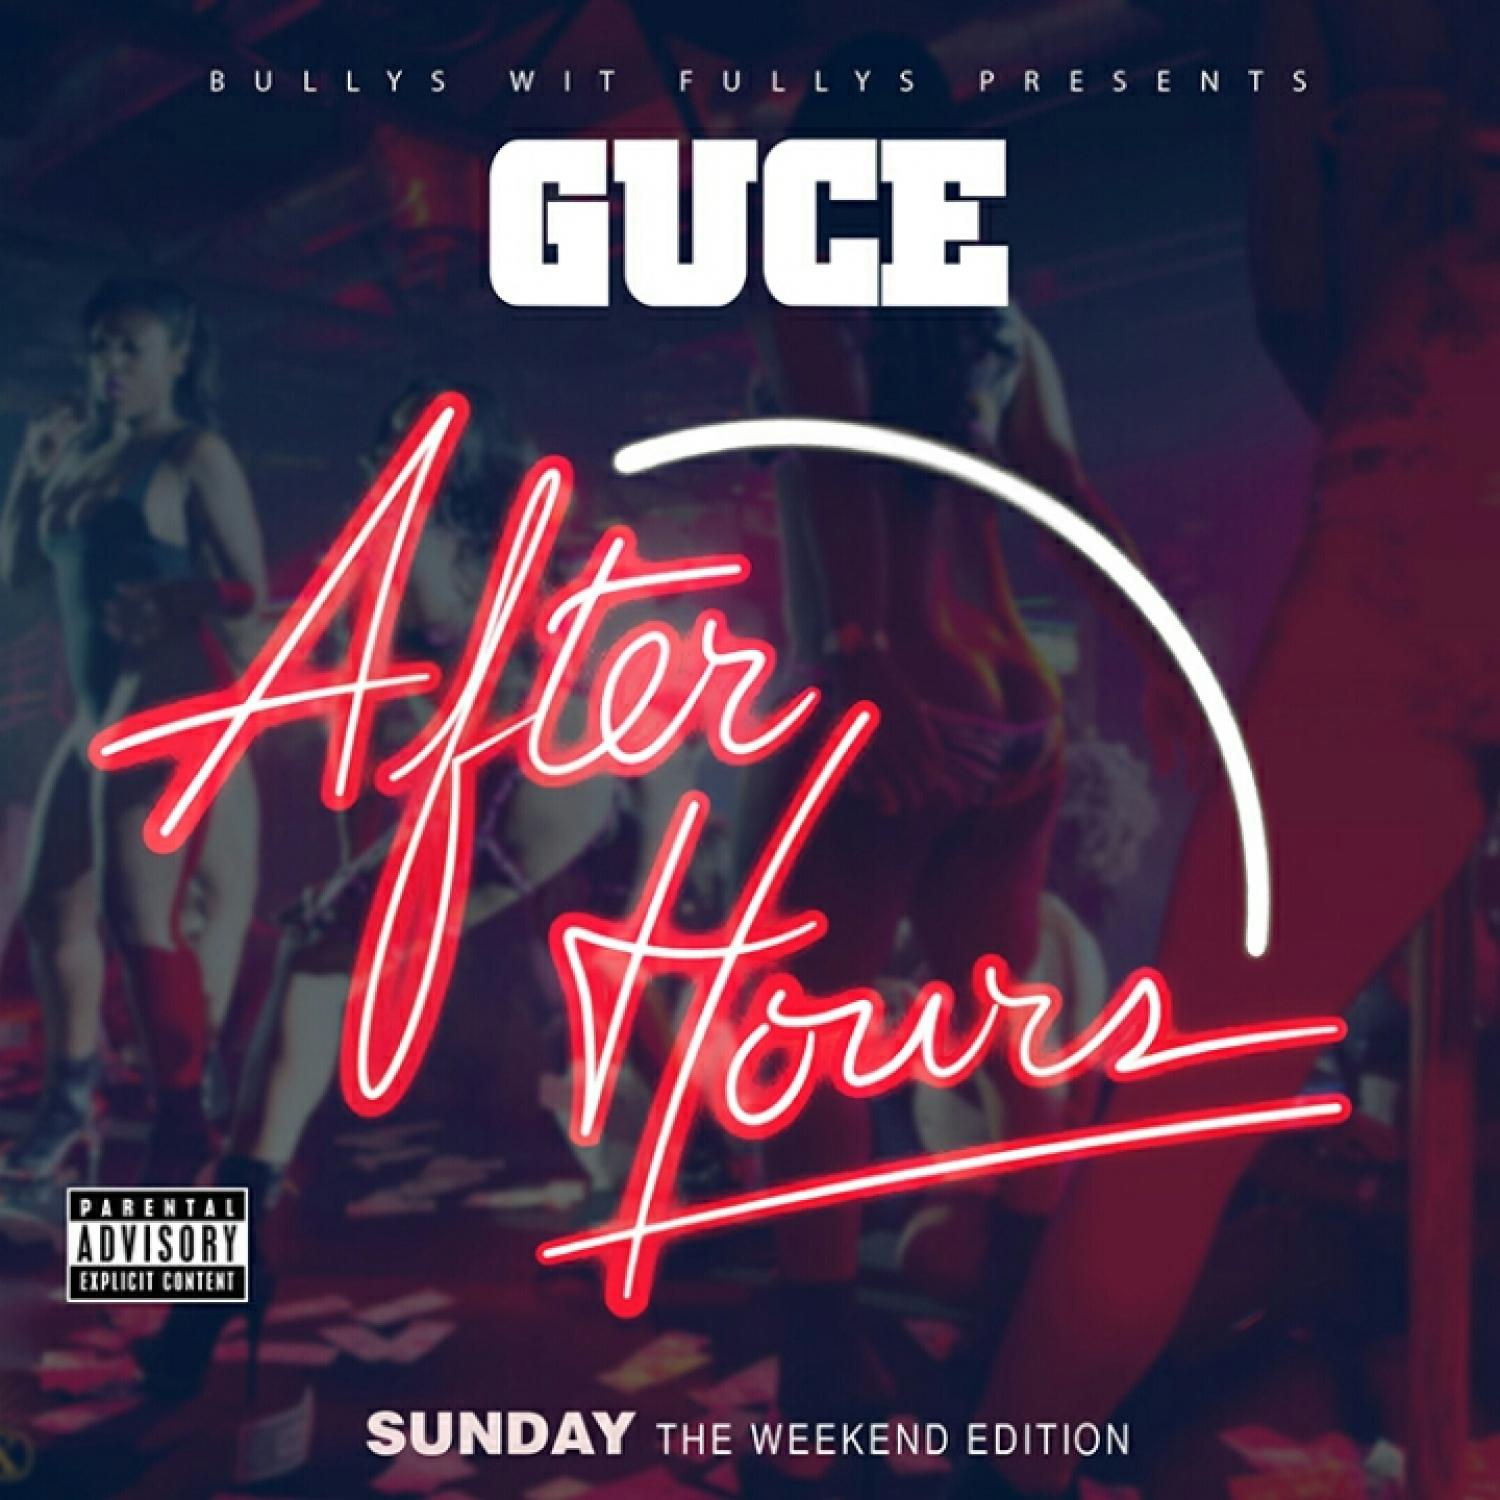 The Weekend Edition: After Hours (Sunday)